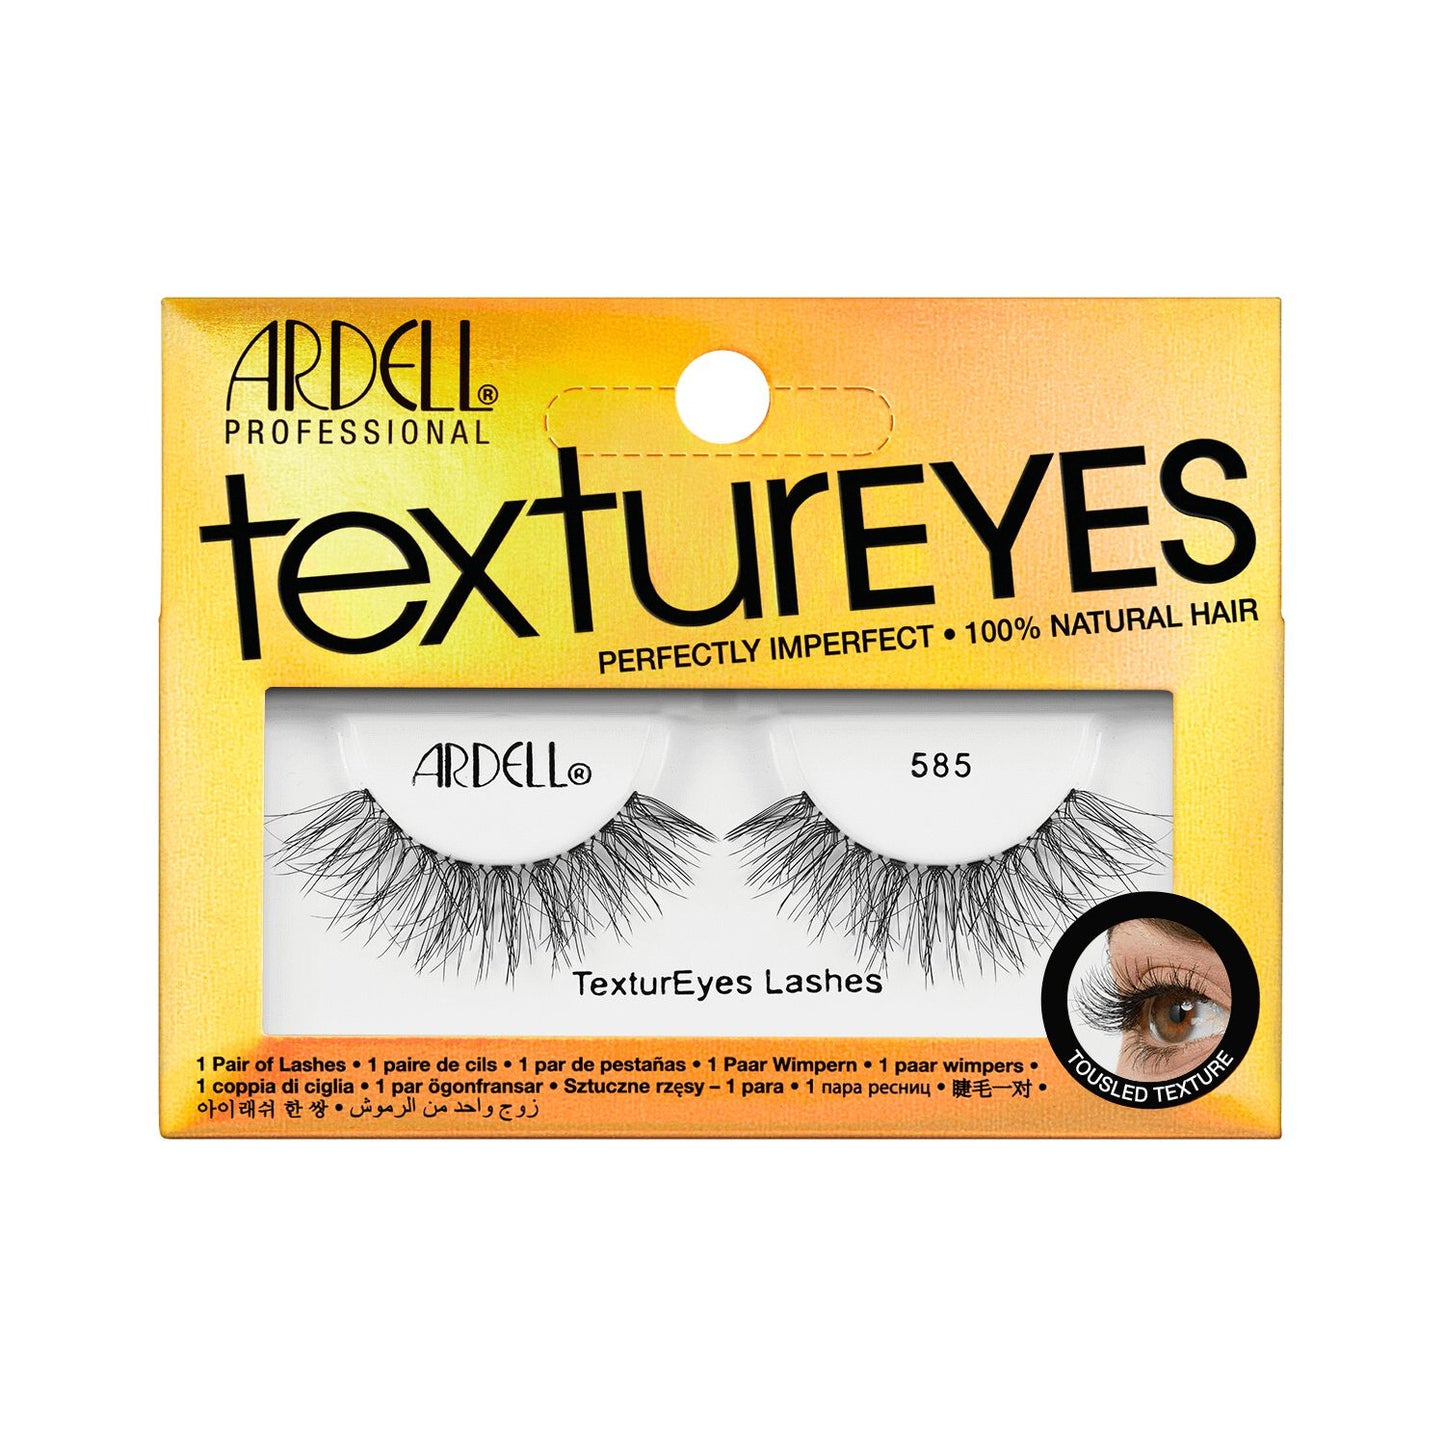 TexturEyes Lashes  by   Ardell TexturEyes #585 Lashes